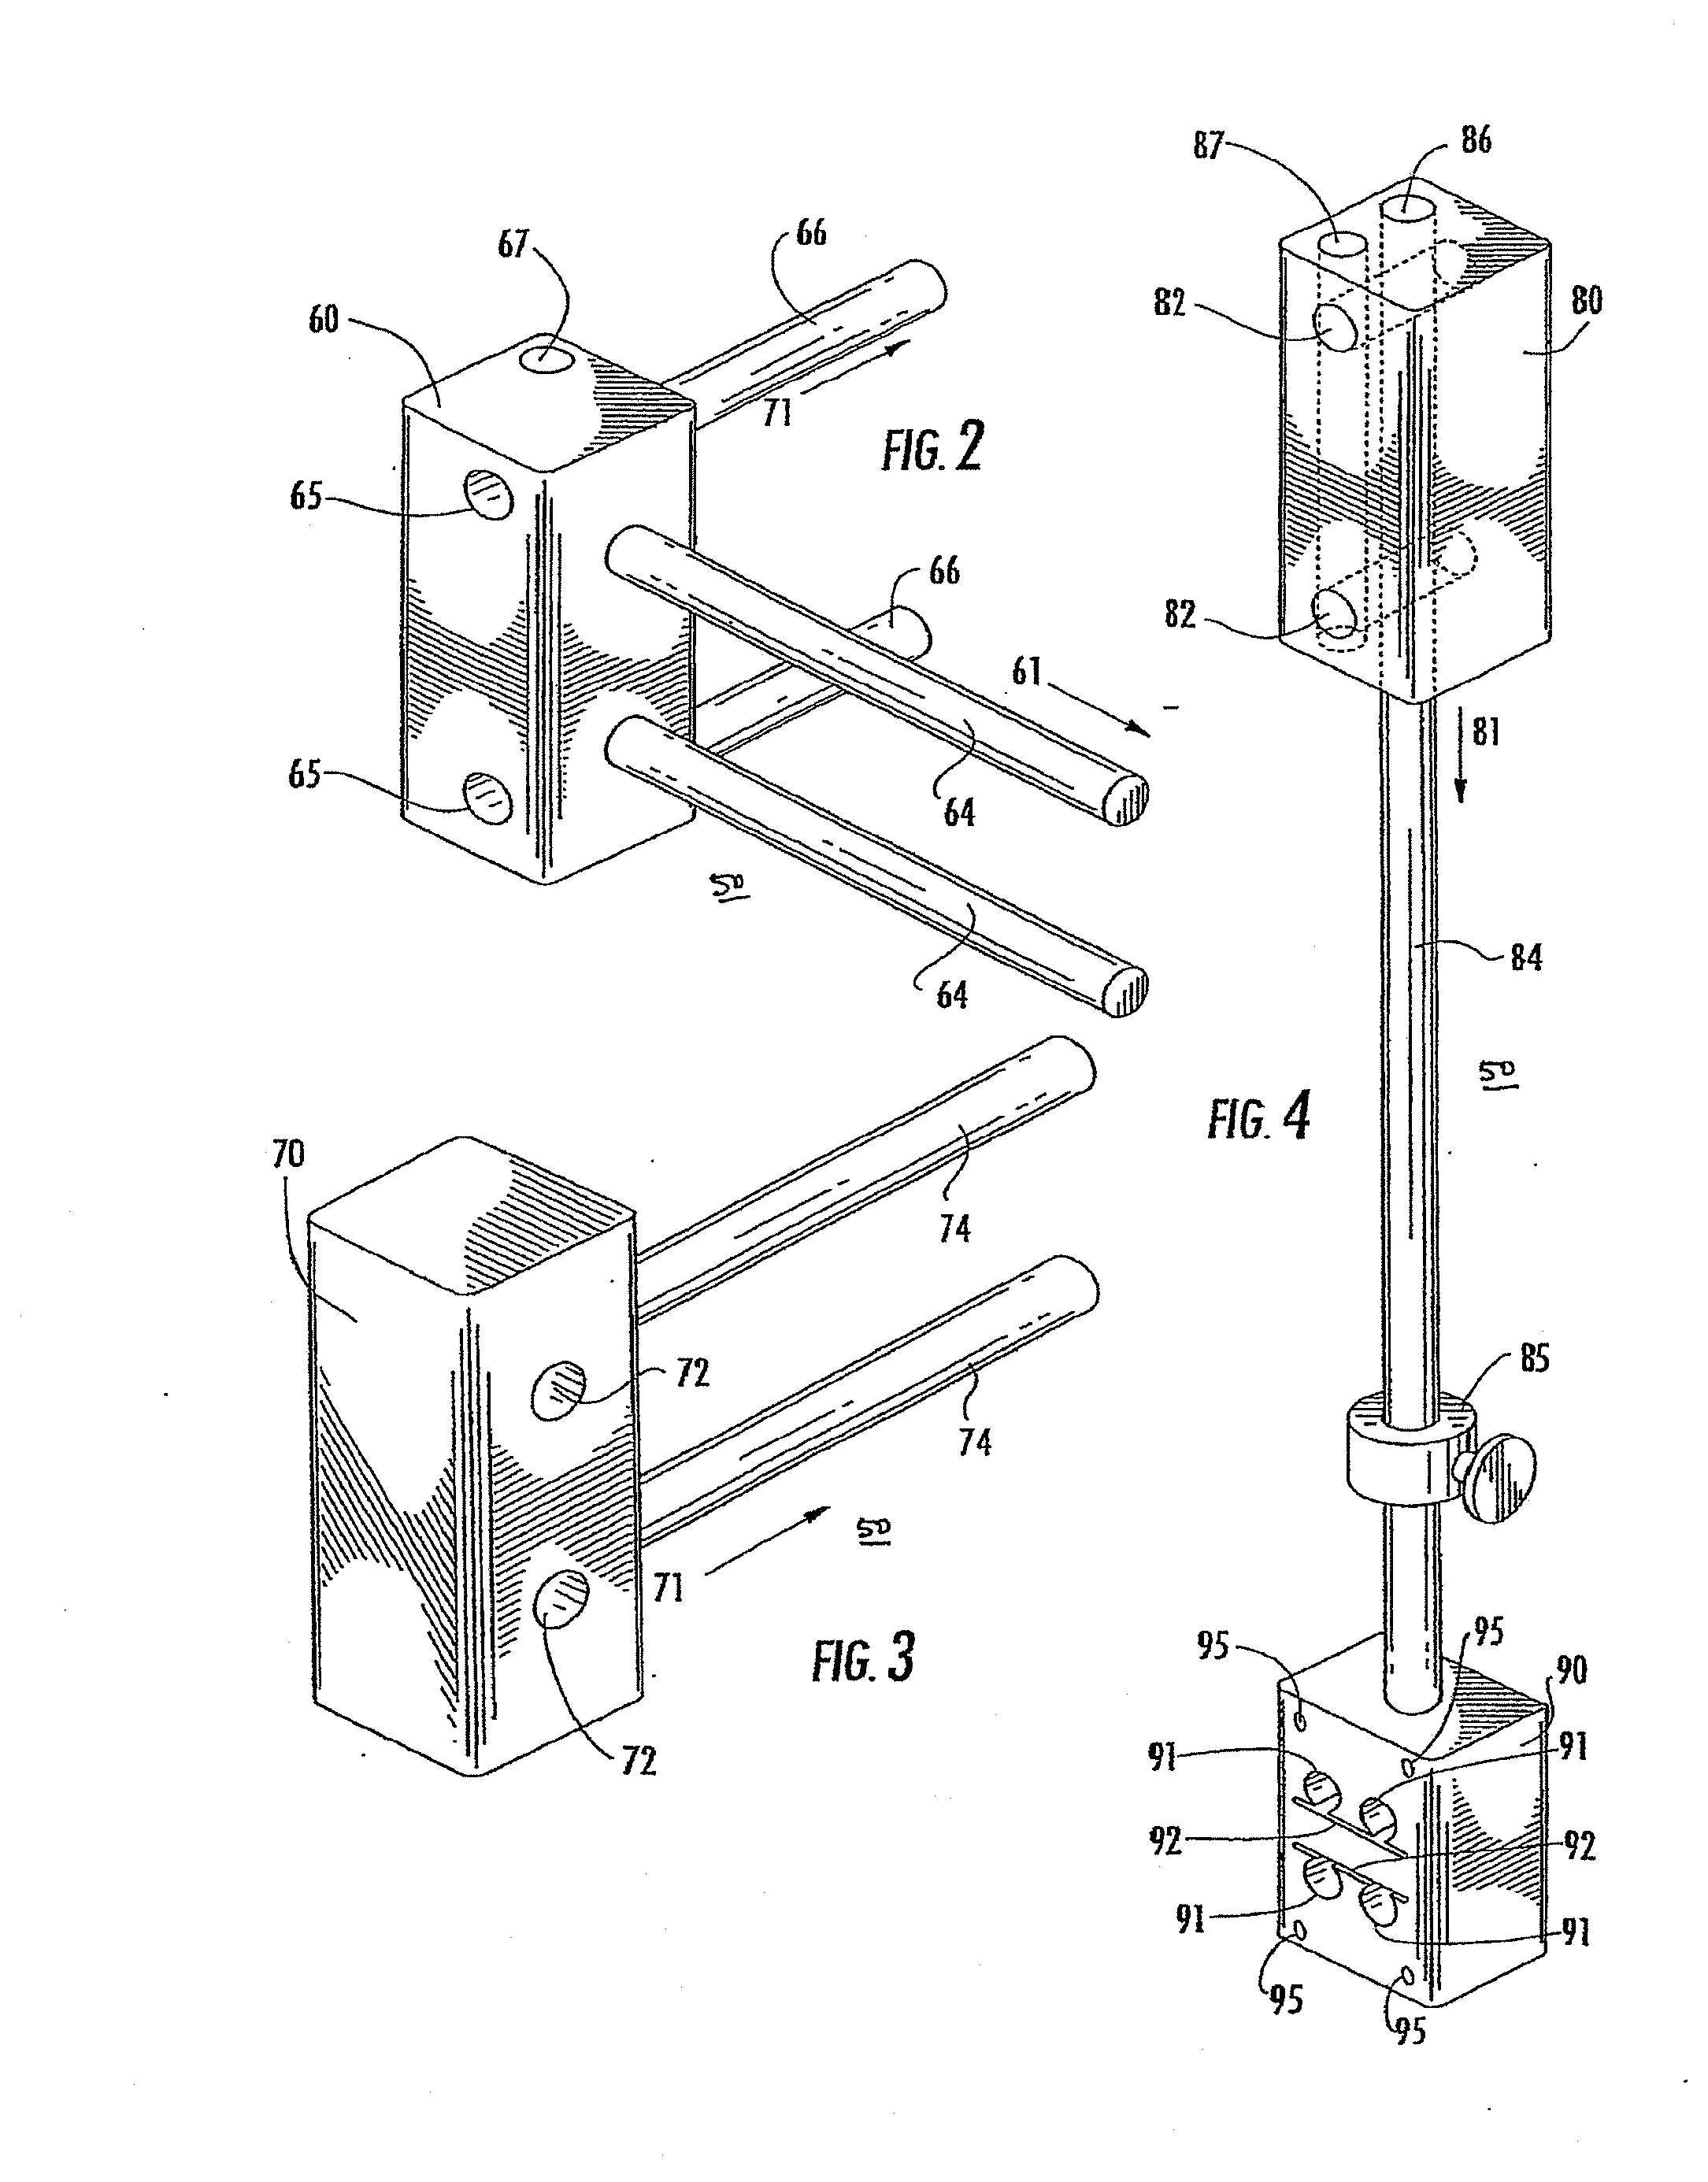 Method of Preparing an Ankle Joint for Replacement, Joint Prosthesis, and Cutting Alignmnet Apparatus for Use in Performing an Arthroplasty Procedure